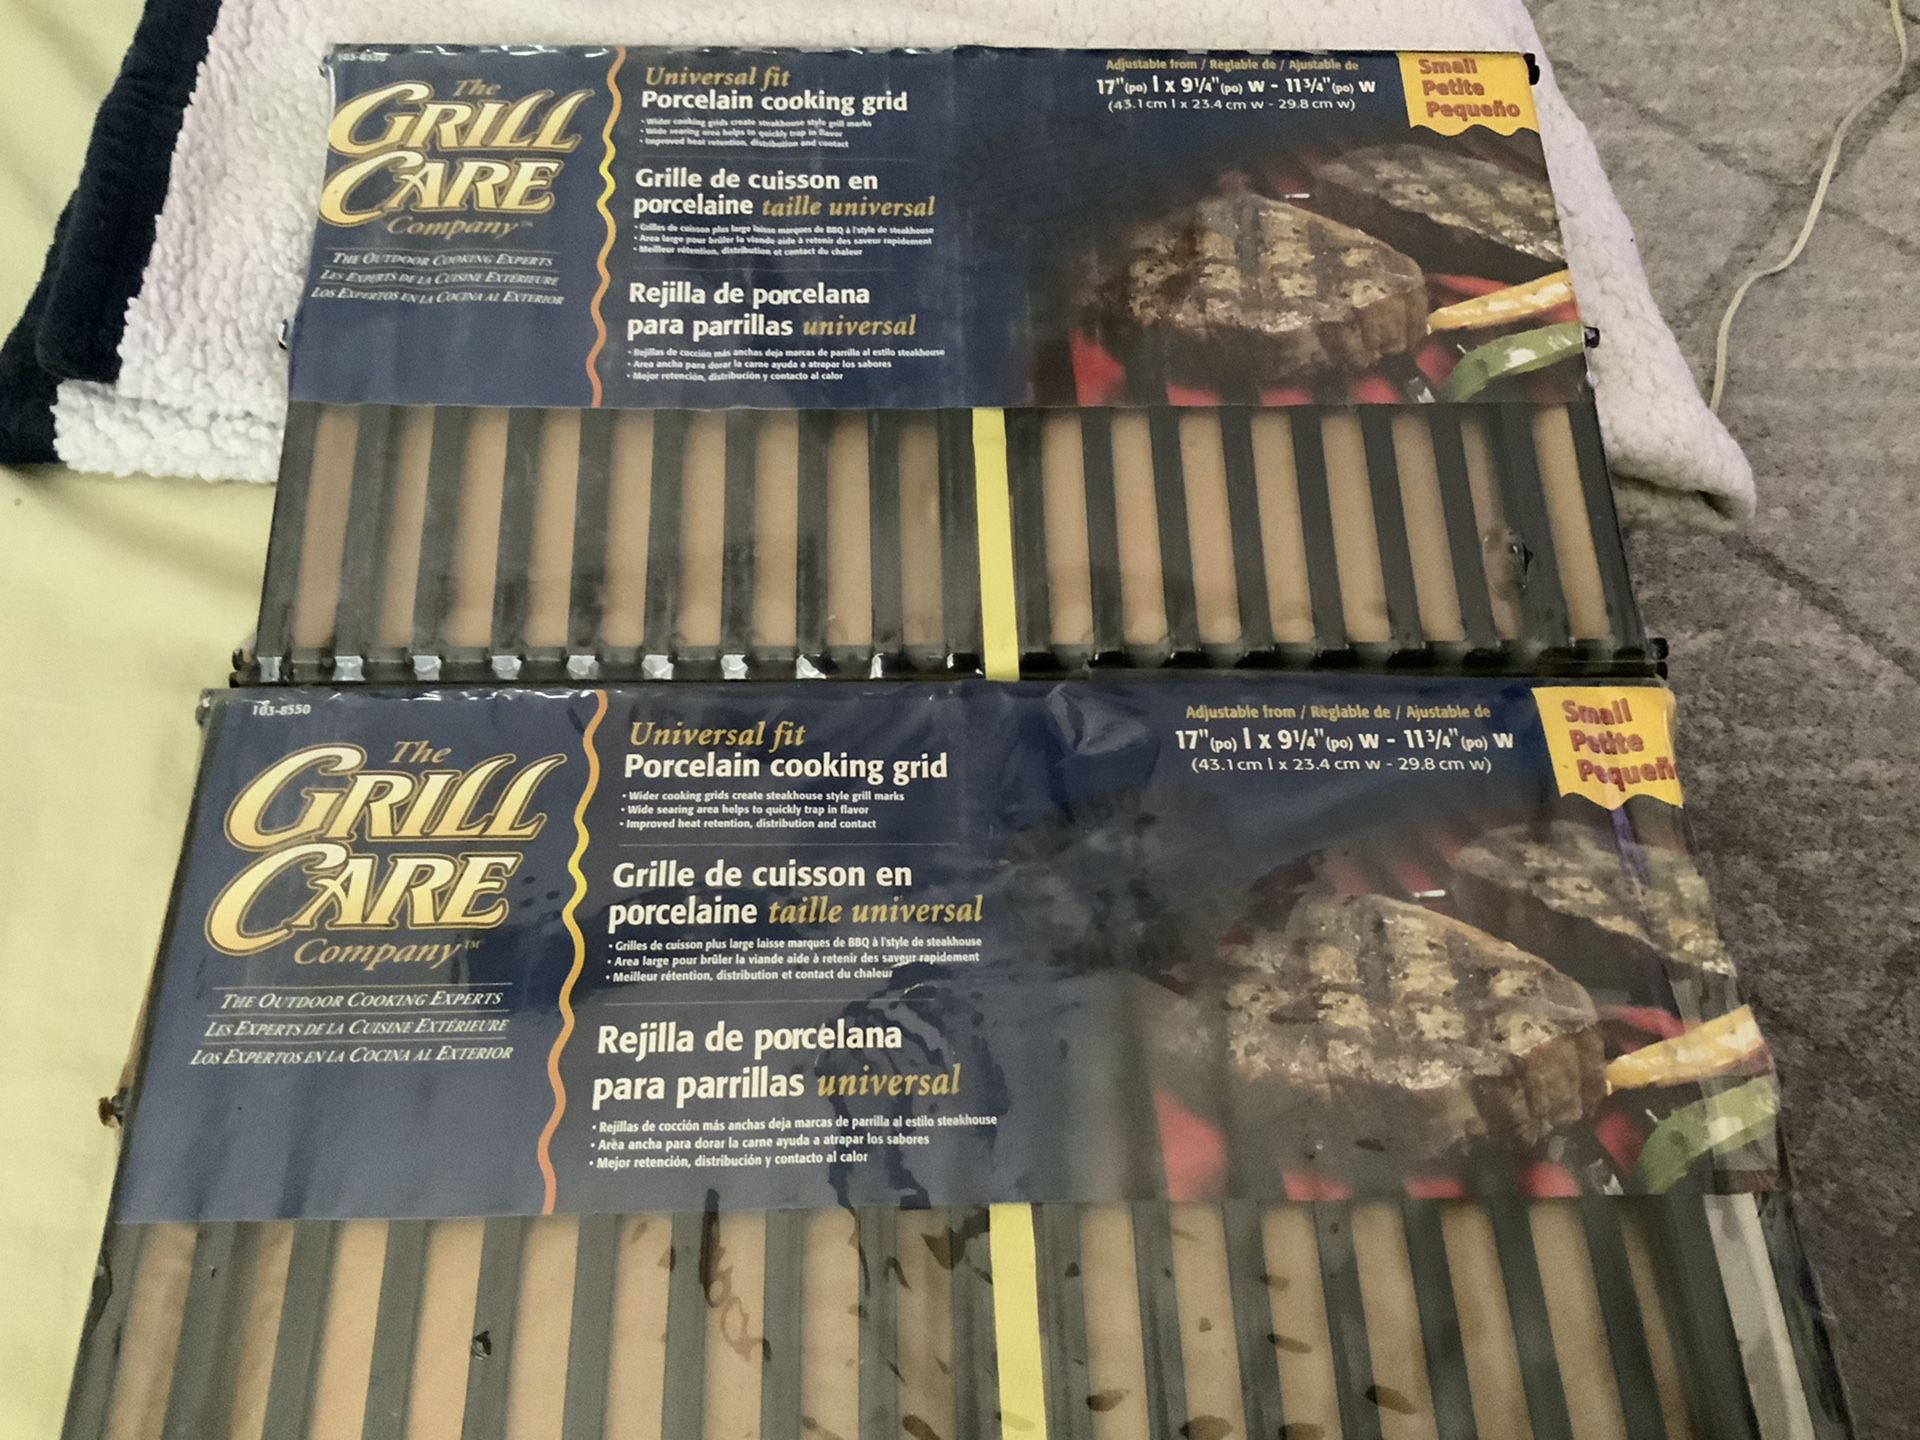 2 SMALL THE GRILL CARE COMPANY UNIVERSAL FIT PORCELAIN COOKING GRID FOR BBQ’S FOR SIZE LOOK AT PHOTOS